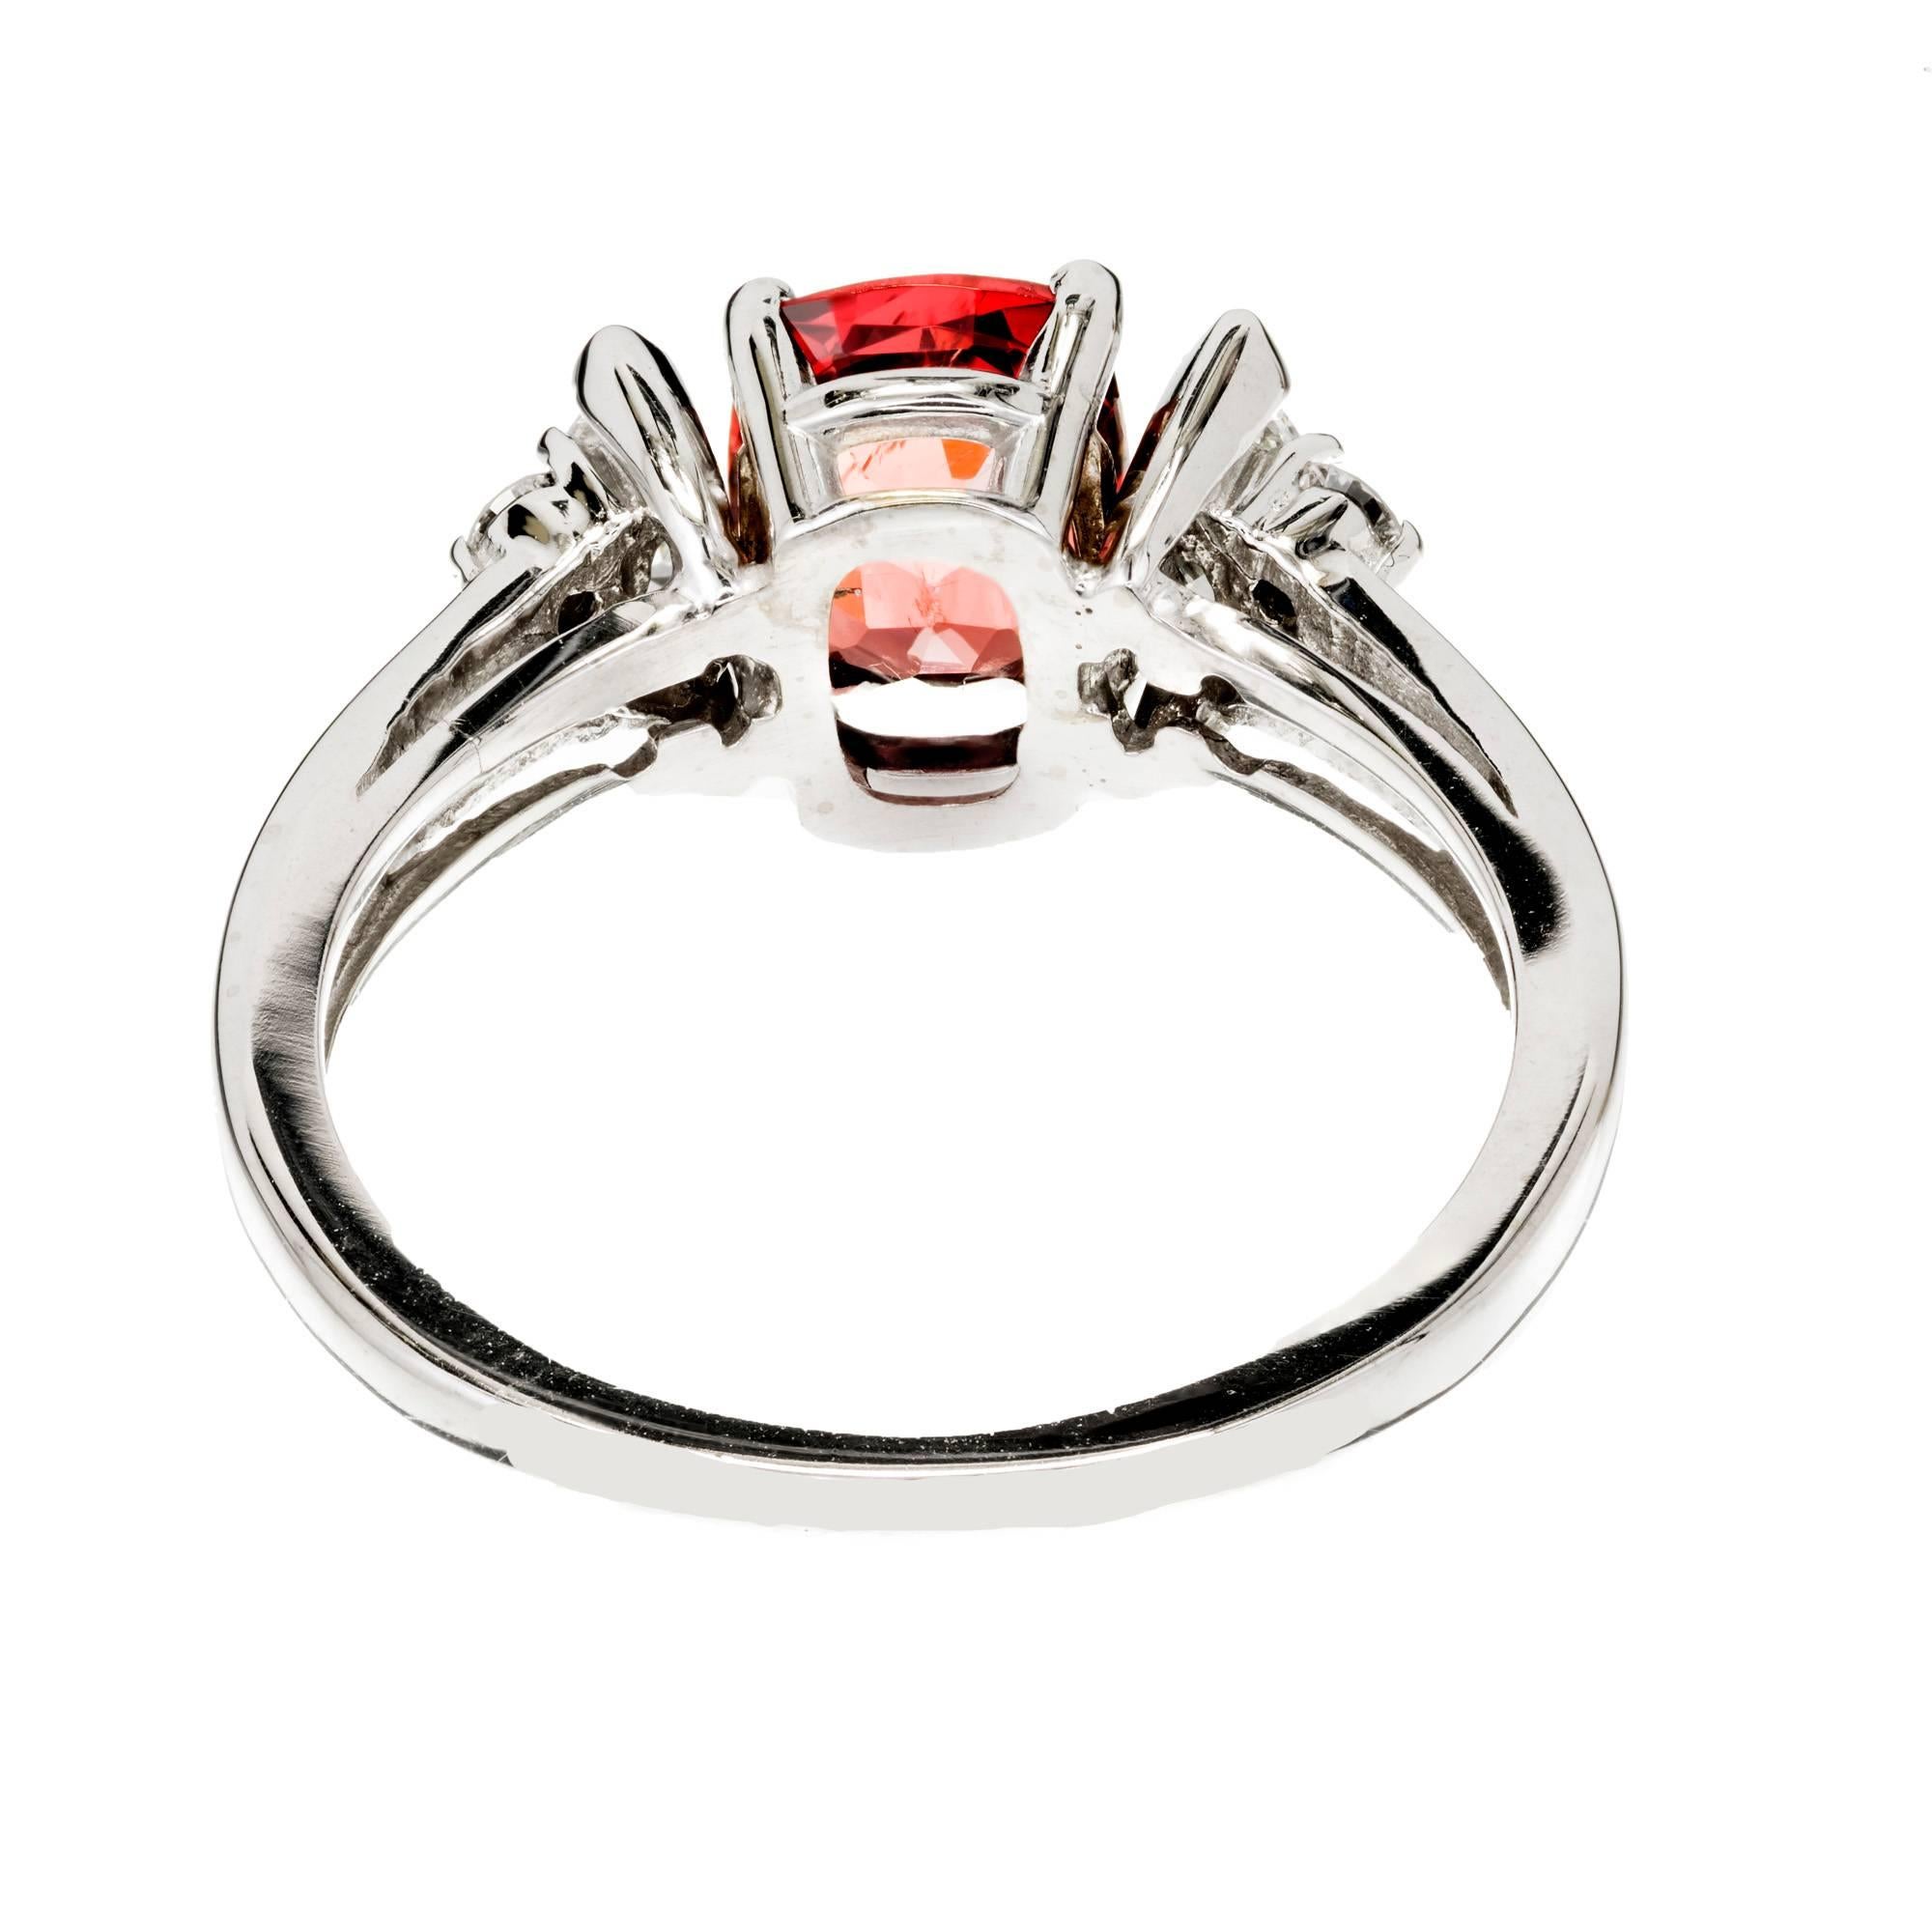 Dana 1.39 Carat Orange Red Spinel Diamond Gold Three-Stone Engagement Ring In Good Condition For Sale In Stamford, CT